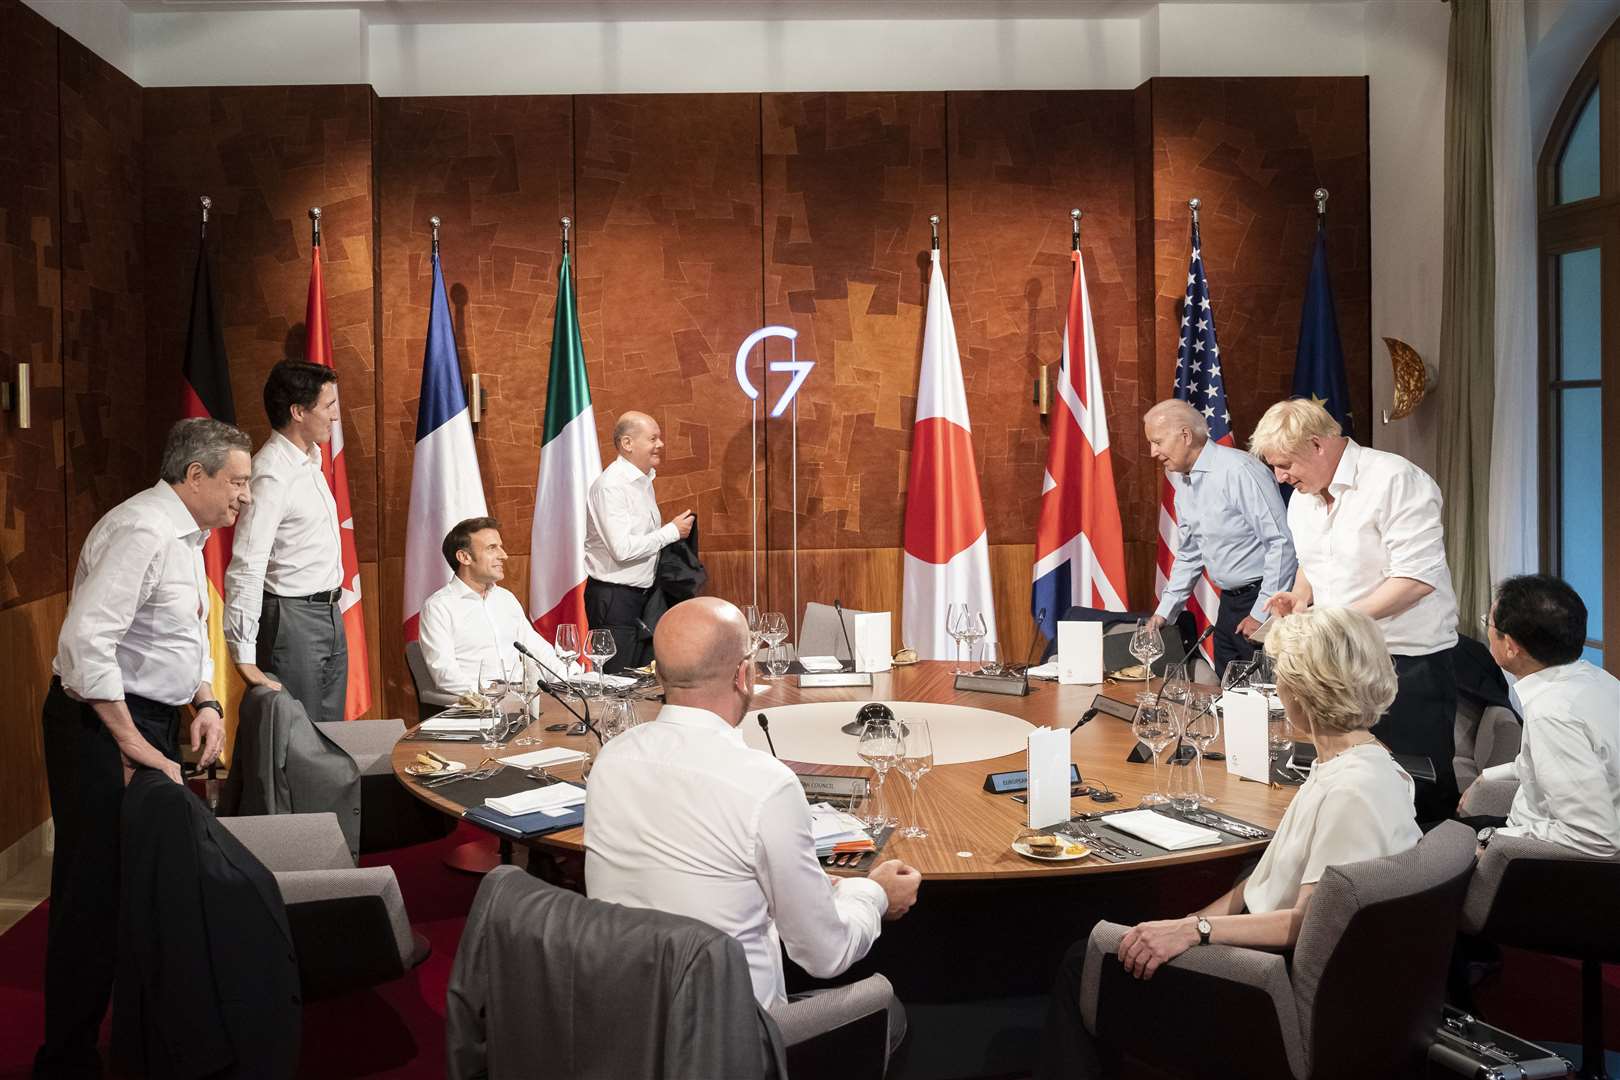 Boris Johnson and other leaders at the G7 summit in Germany (Federal Government/Bundesregierung/Steffen Kugler/PA)